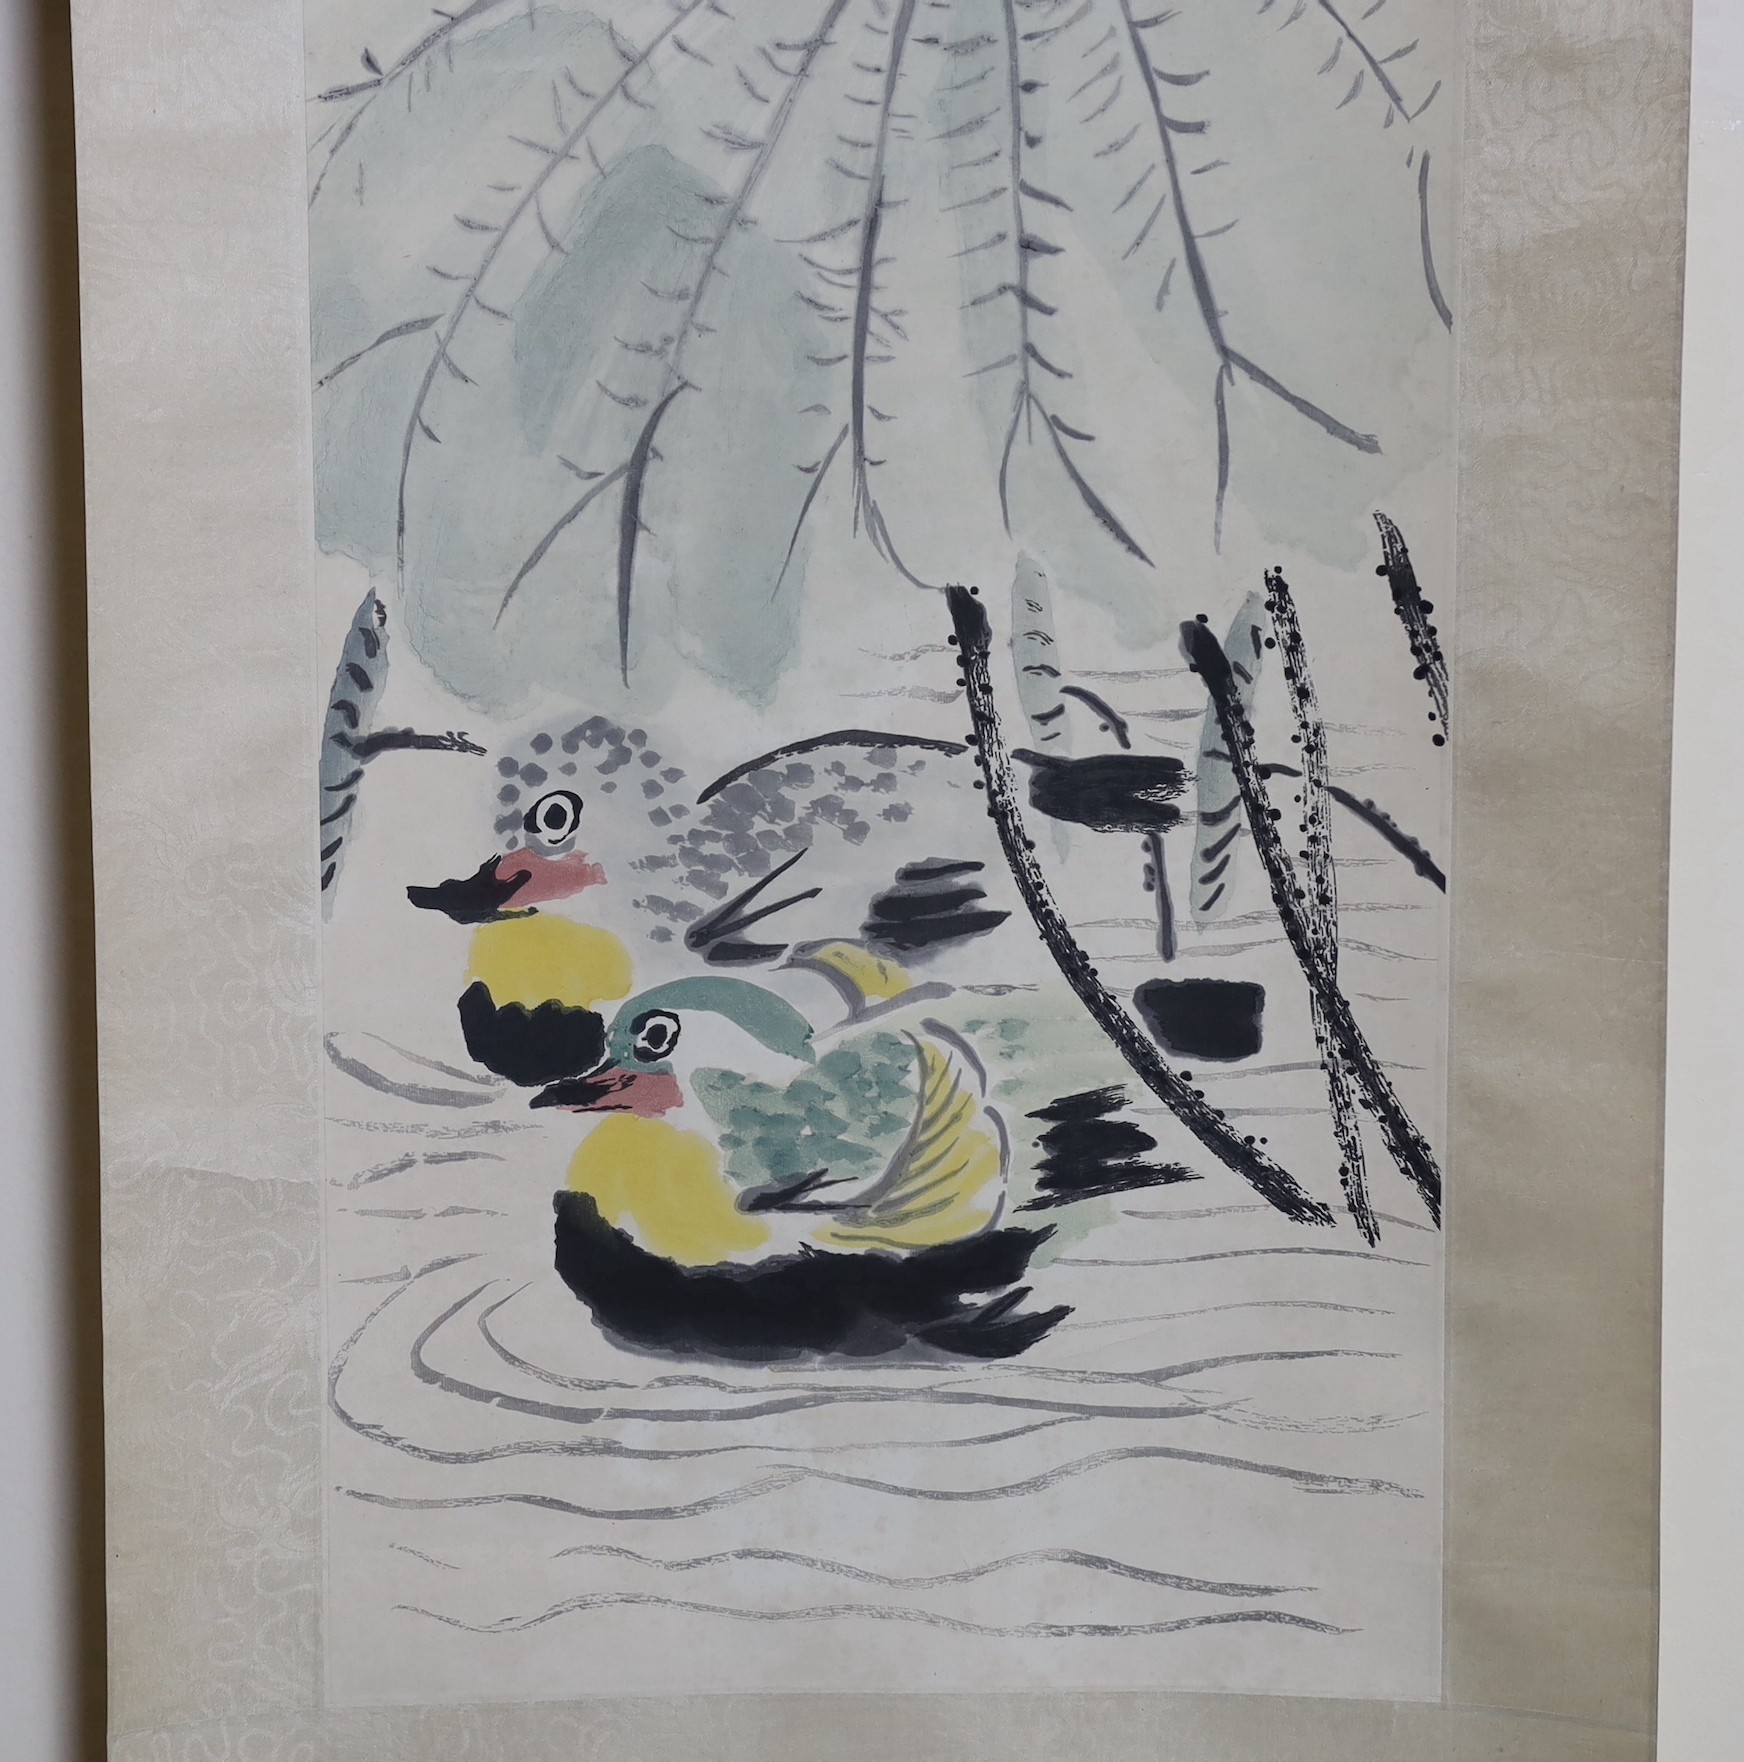 After Qi Baishi (1863-1957), Mandarin ducks, printed scroll, published by Tianjin Arts & Crafts Export Company, 1959, image 103cm x 33cm